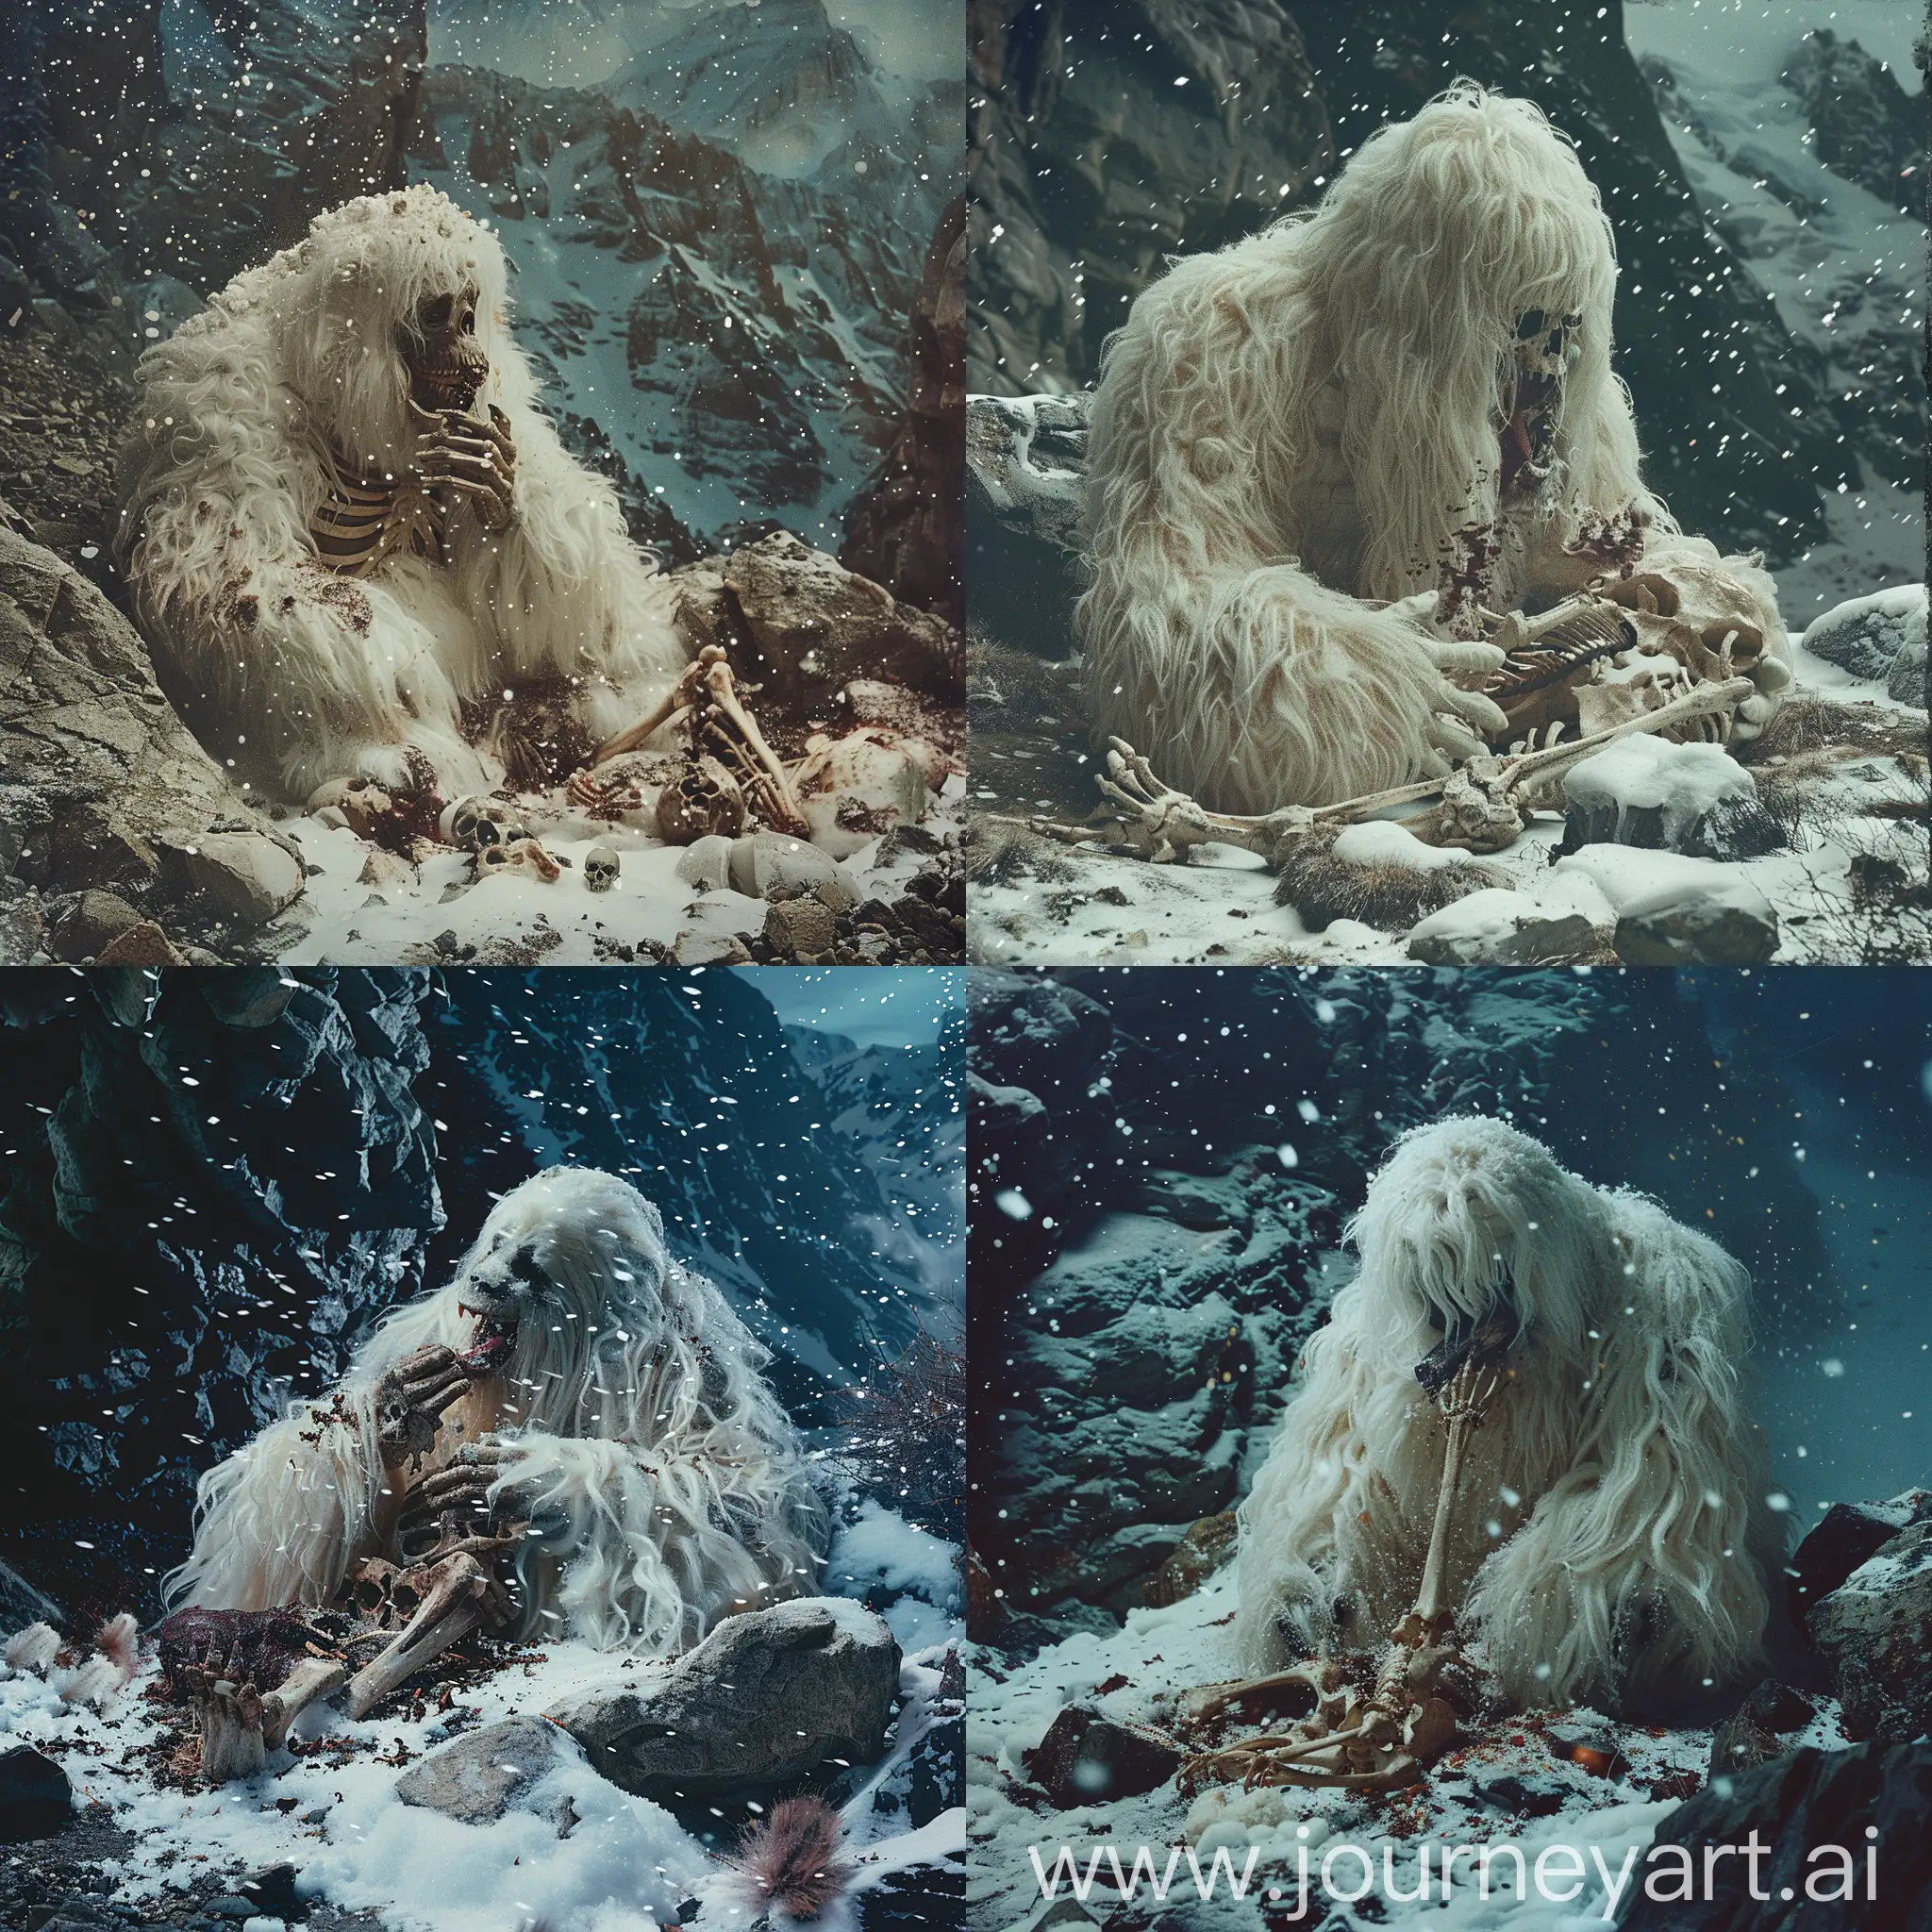 Abominable-Snowman-Feasting-on-Remains-in-Snowy-Cave